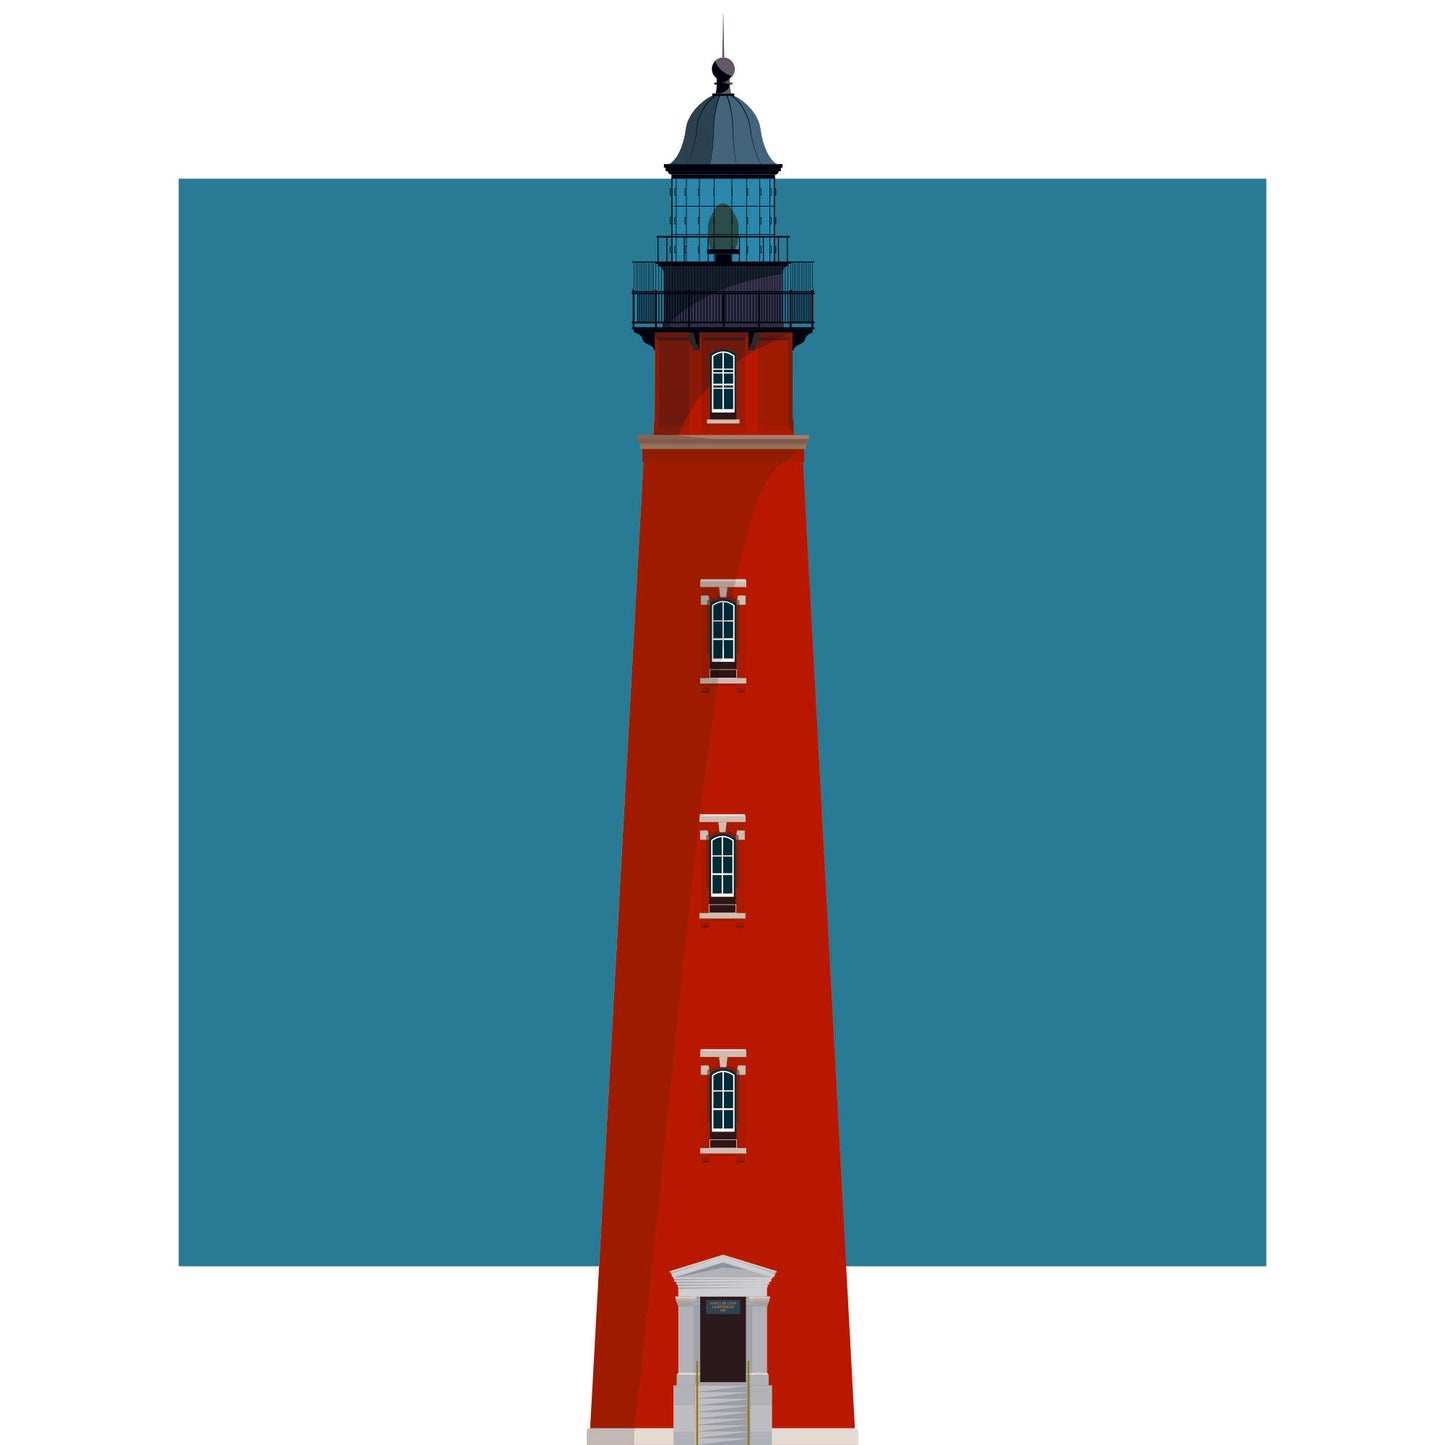 Illustration of the Ponce de Leon Inlet lighthouse, Florida, USA. On a white background with aqua blue square as a backdrop.